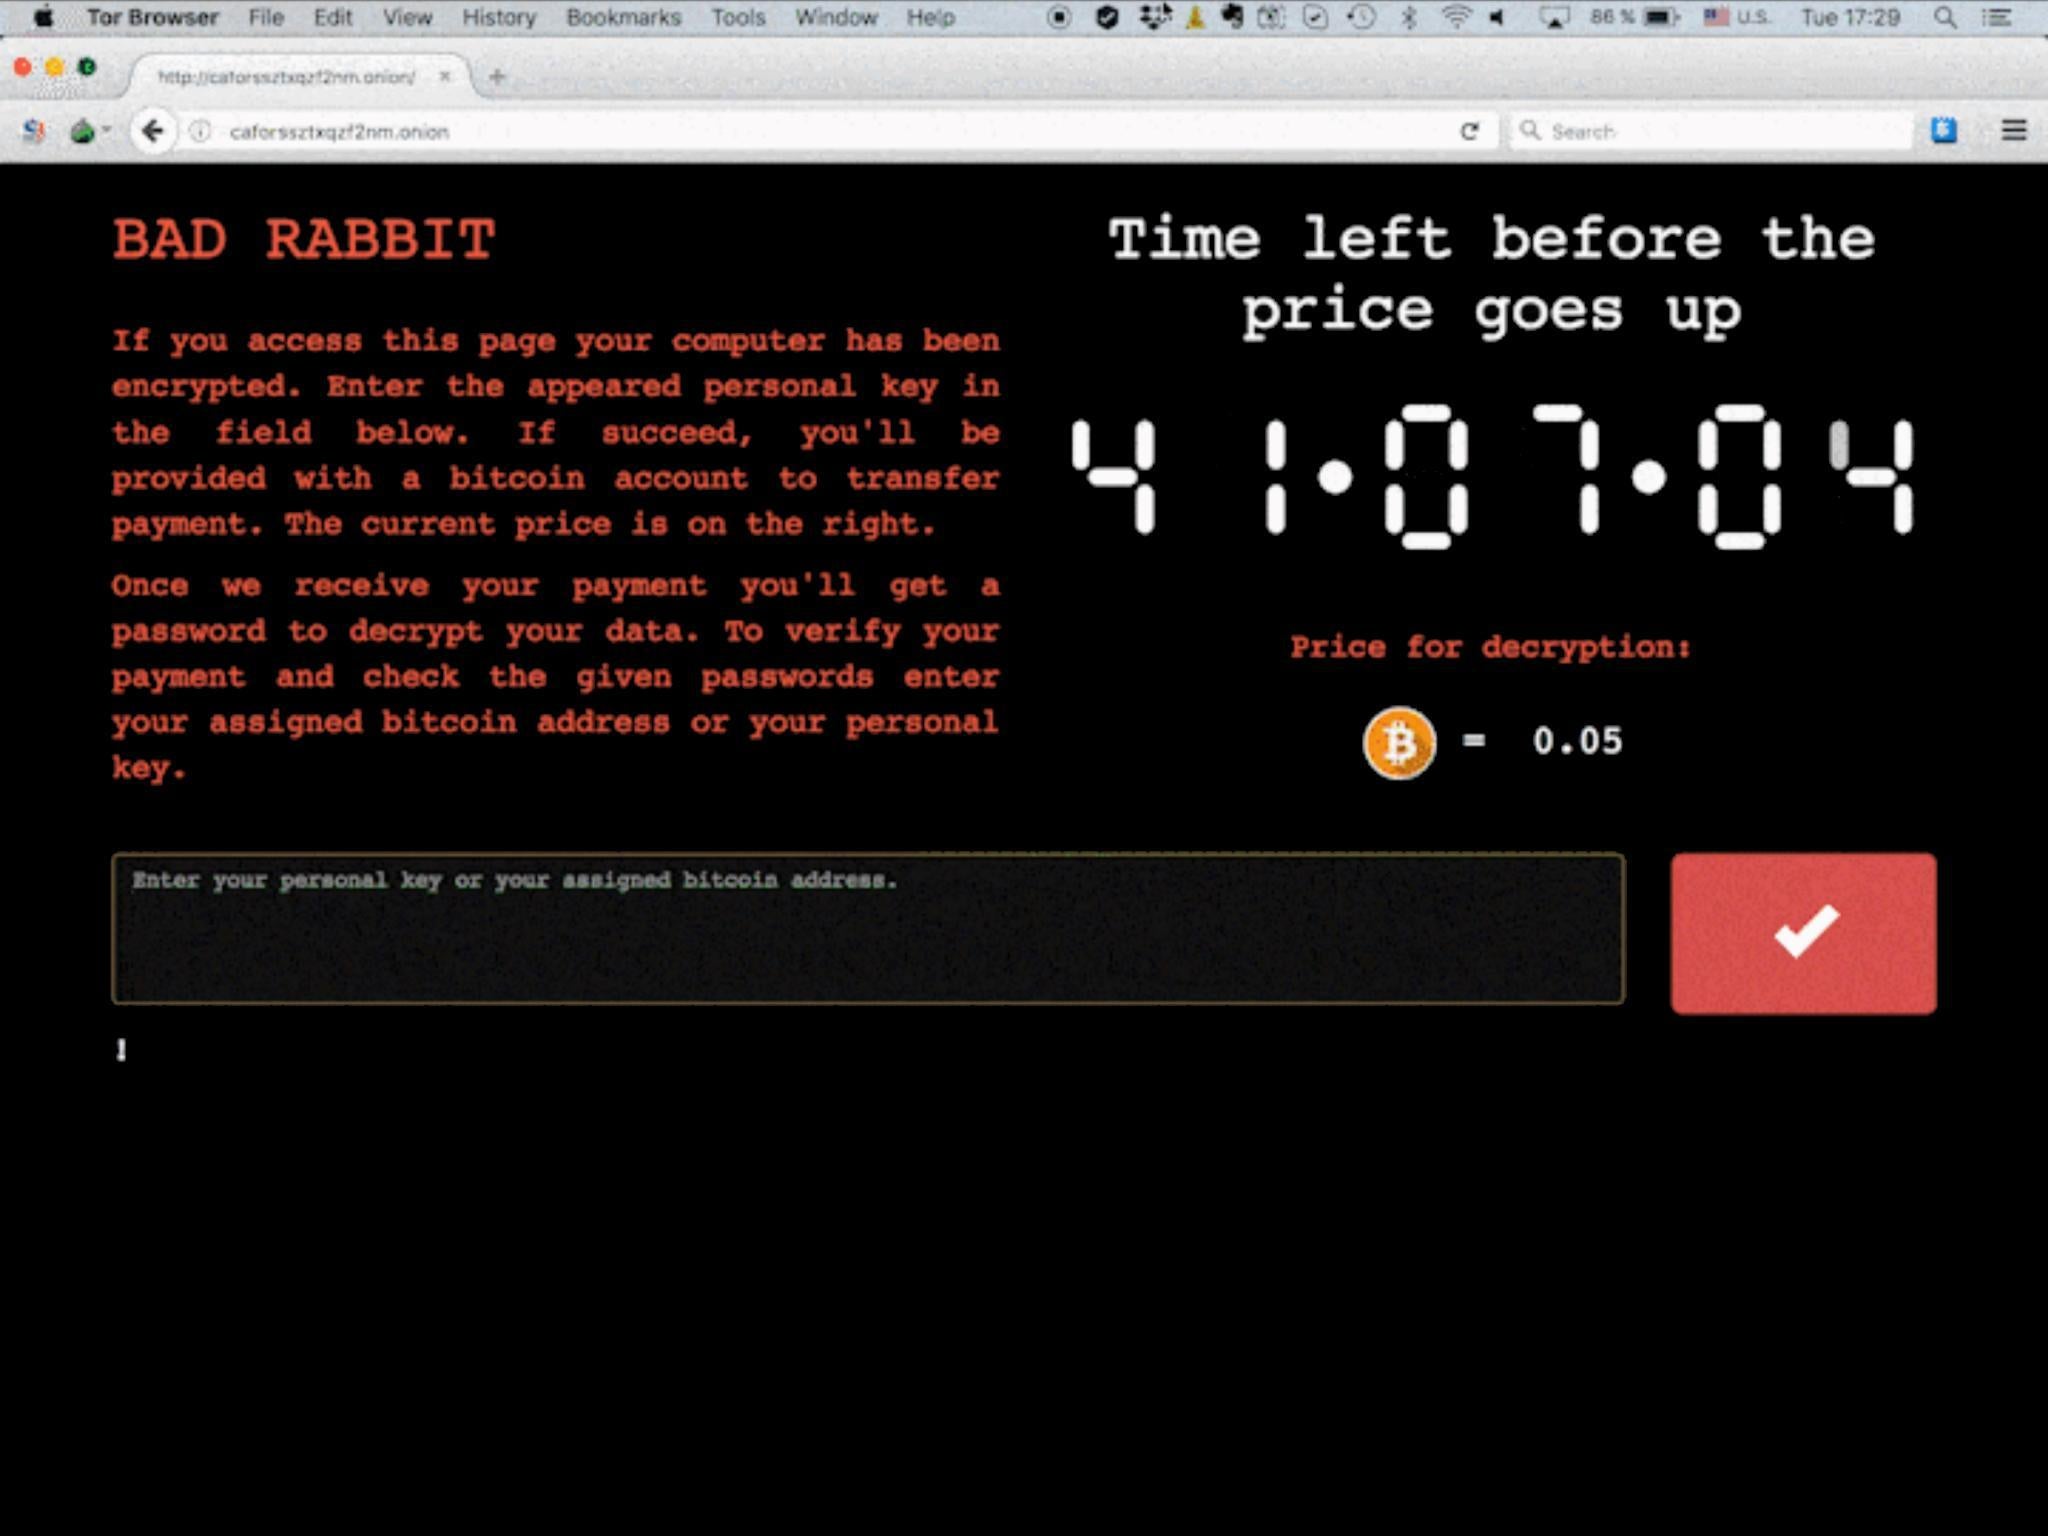 According to the Bad Rabbit ransom screen, the fee is set to rise